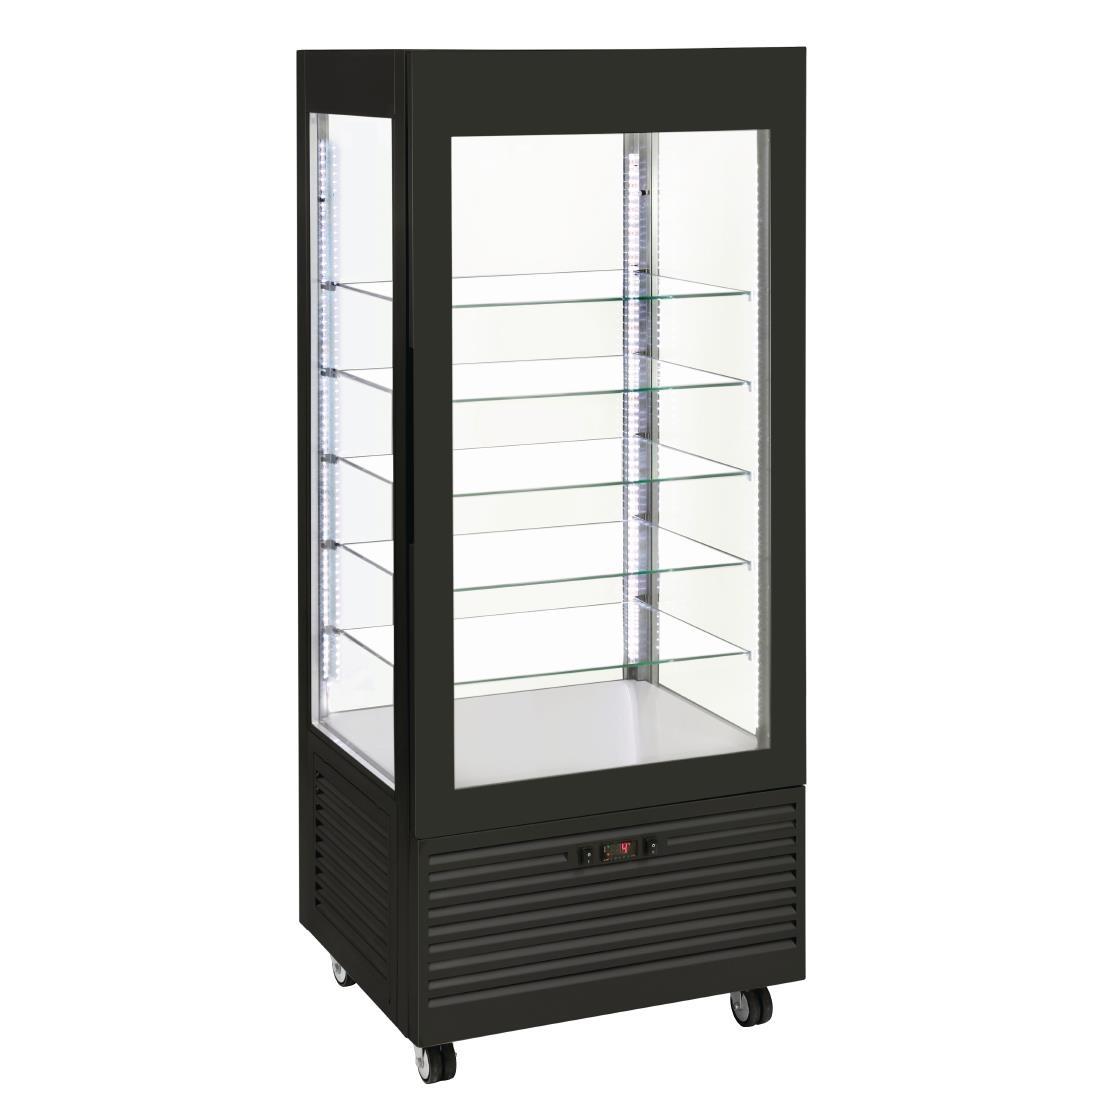 Roller Grill Display Fridge with Fixed Shelves Black - DT737  - 1